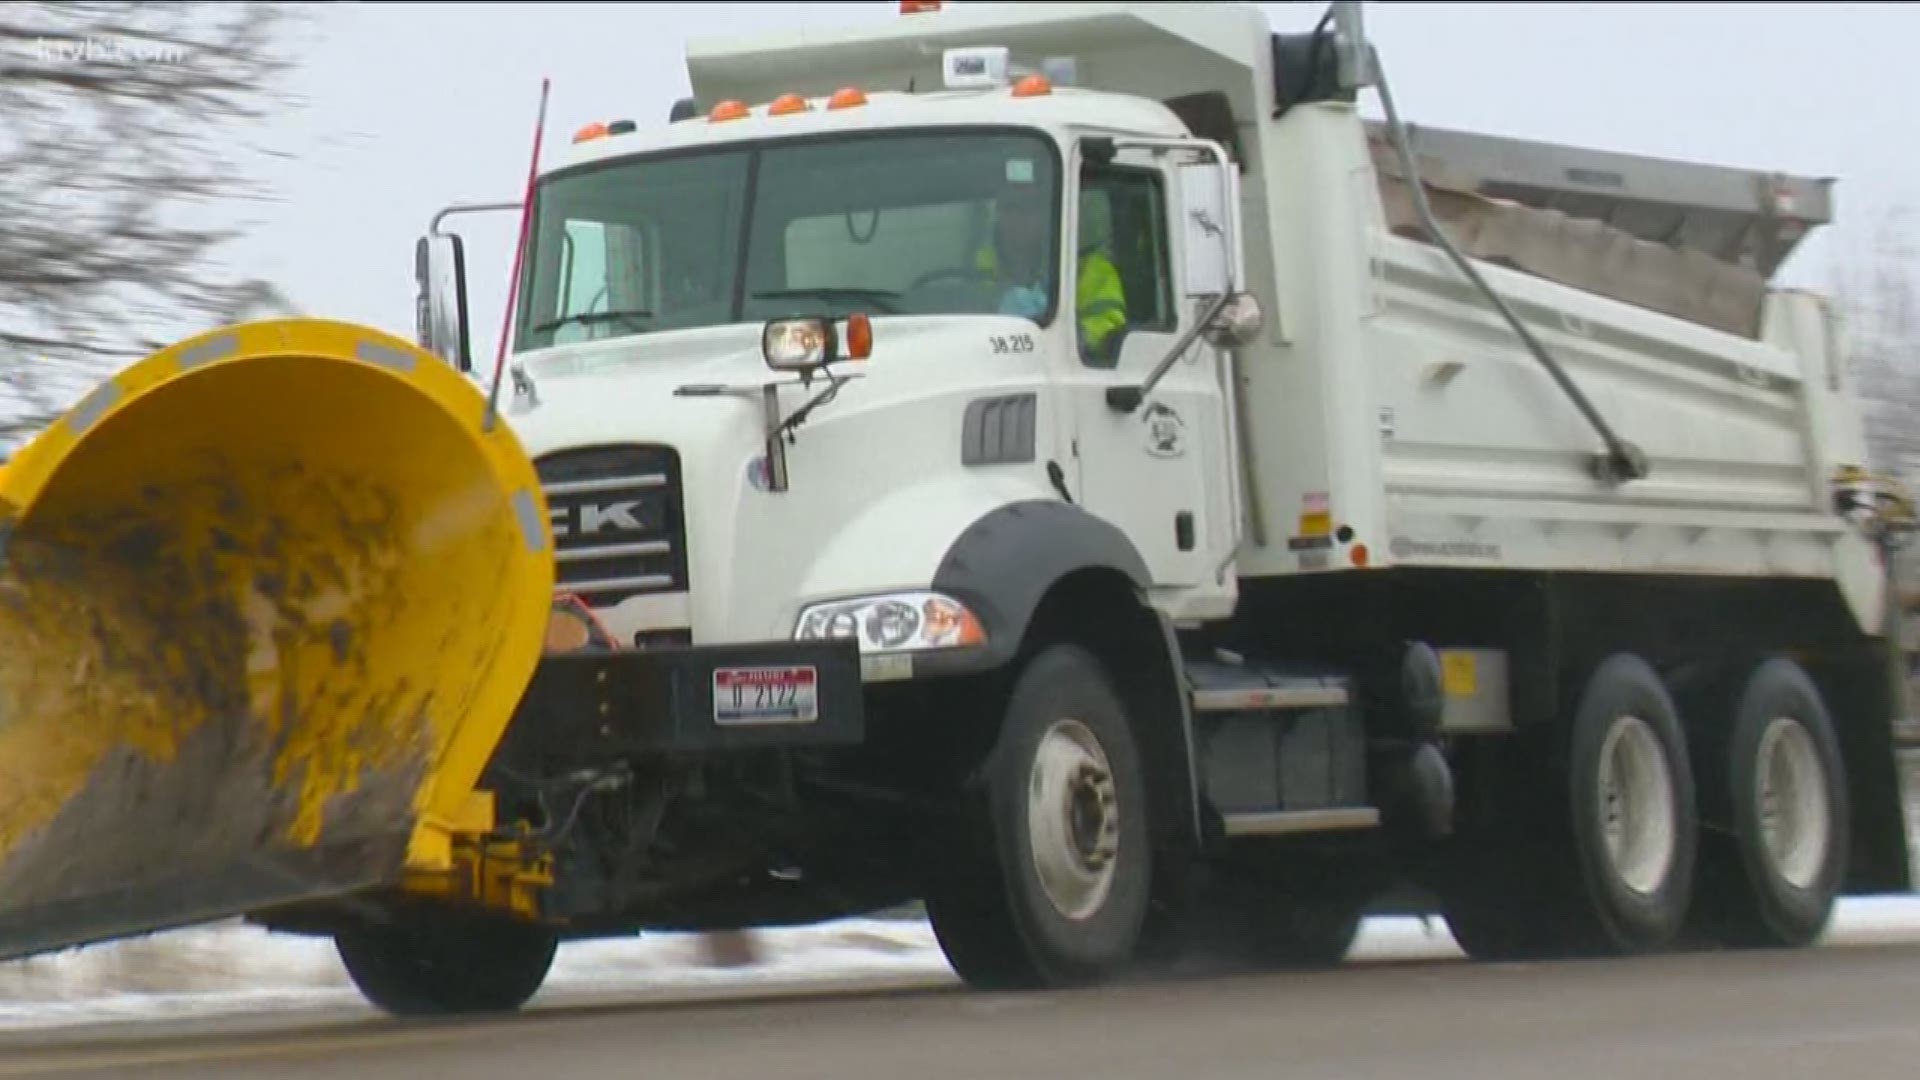 Snow removal operations around the valley were in full swing Wednesday.